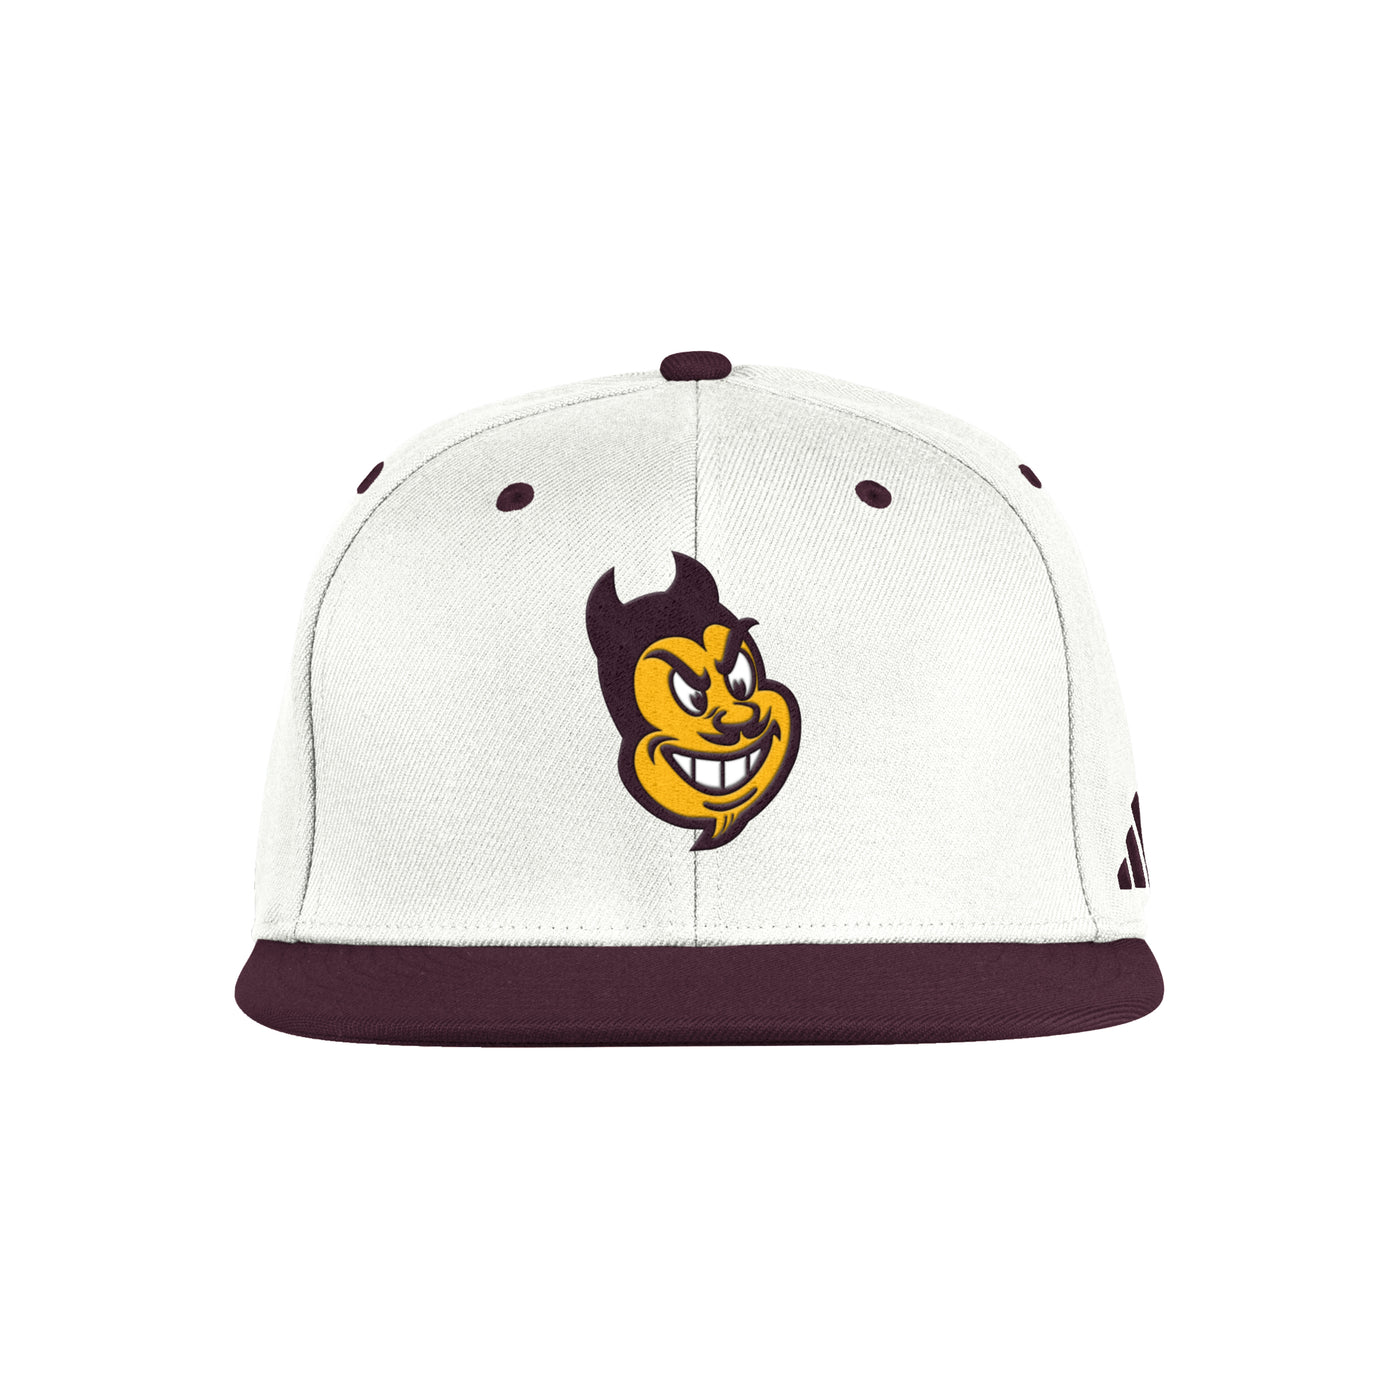 ASU white and maroon fitted hat with Sparky's face on the front